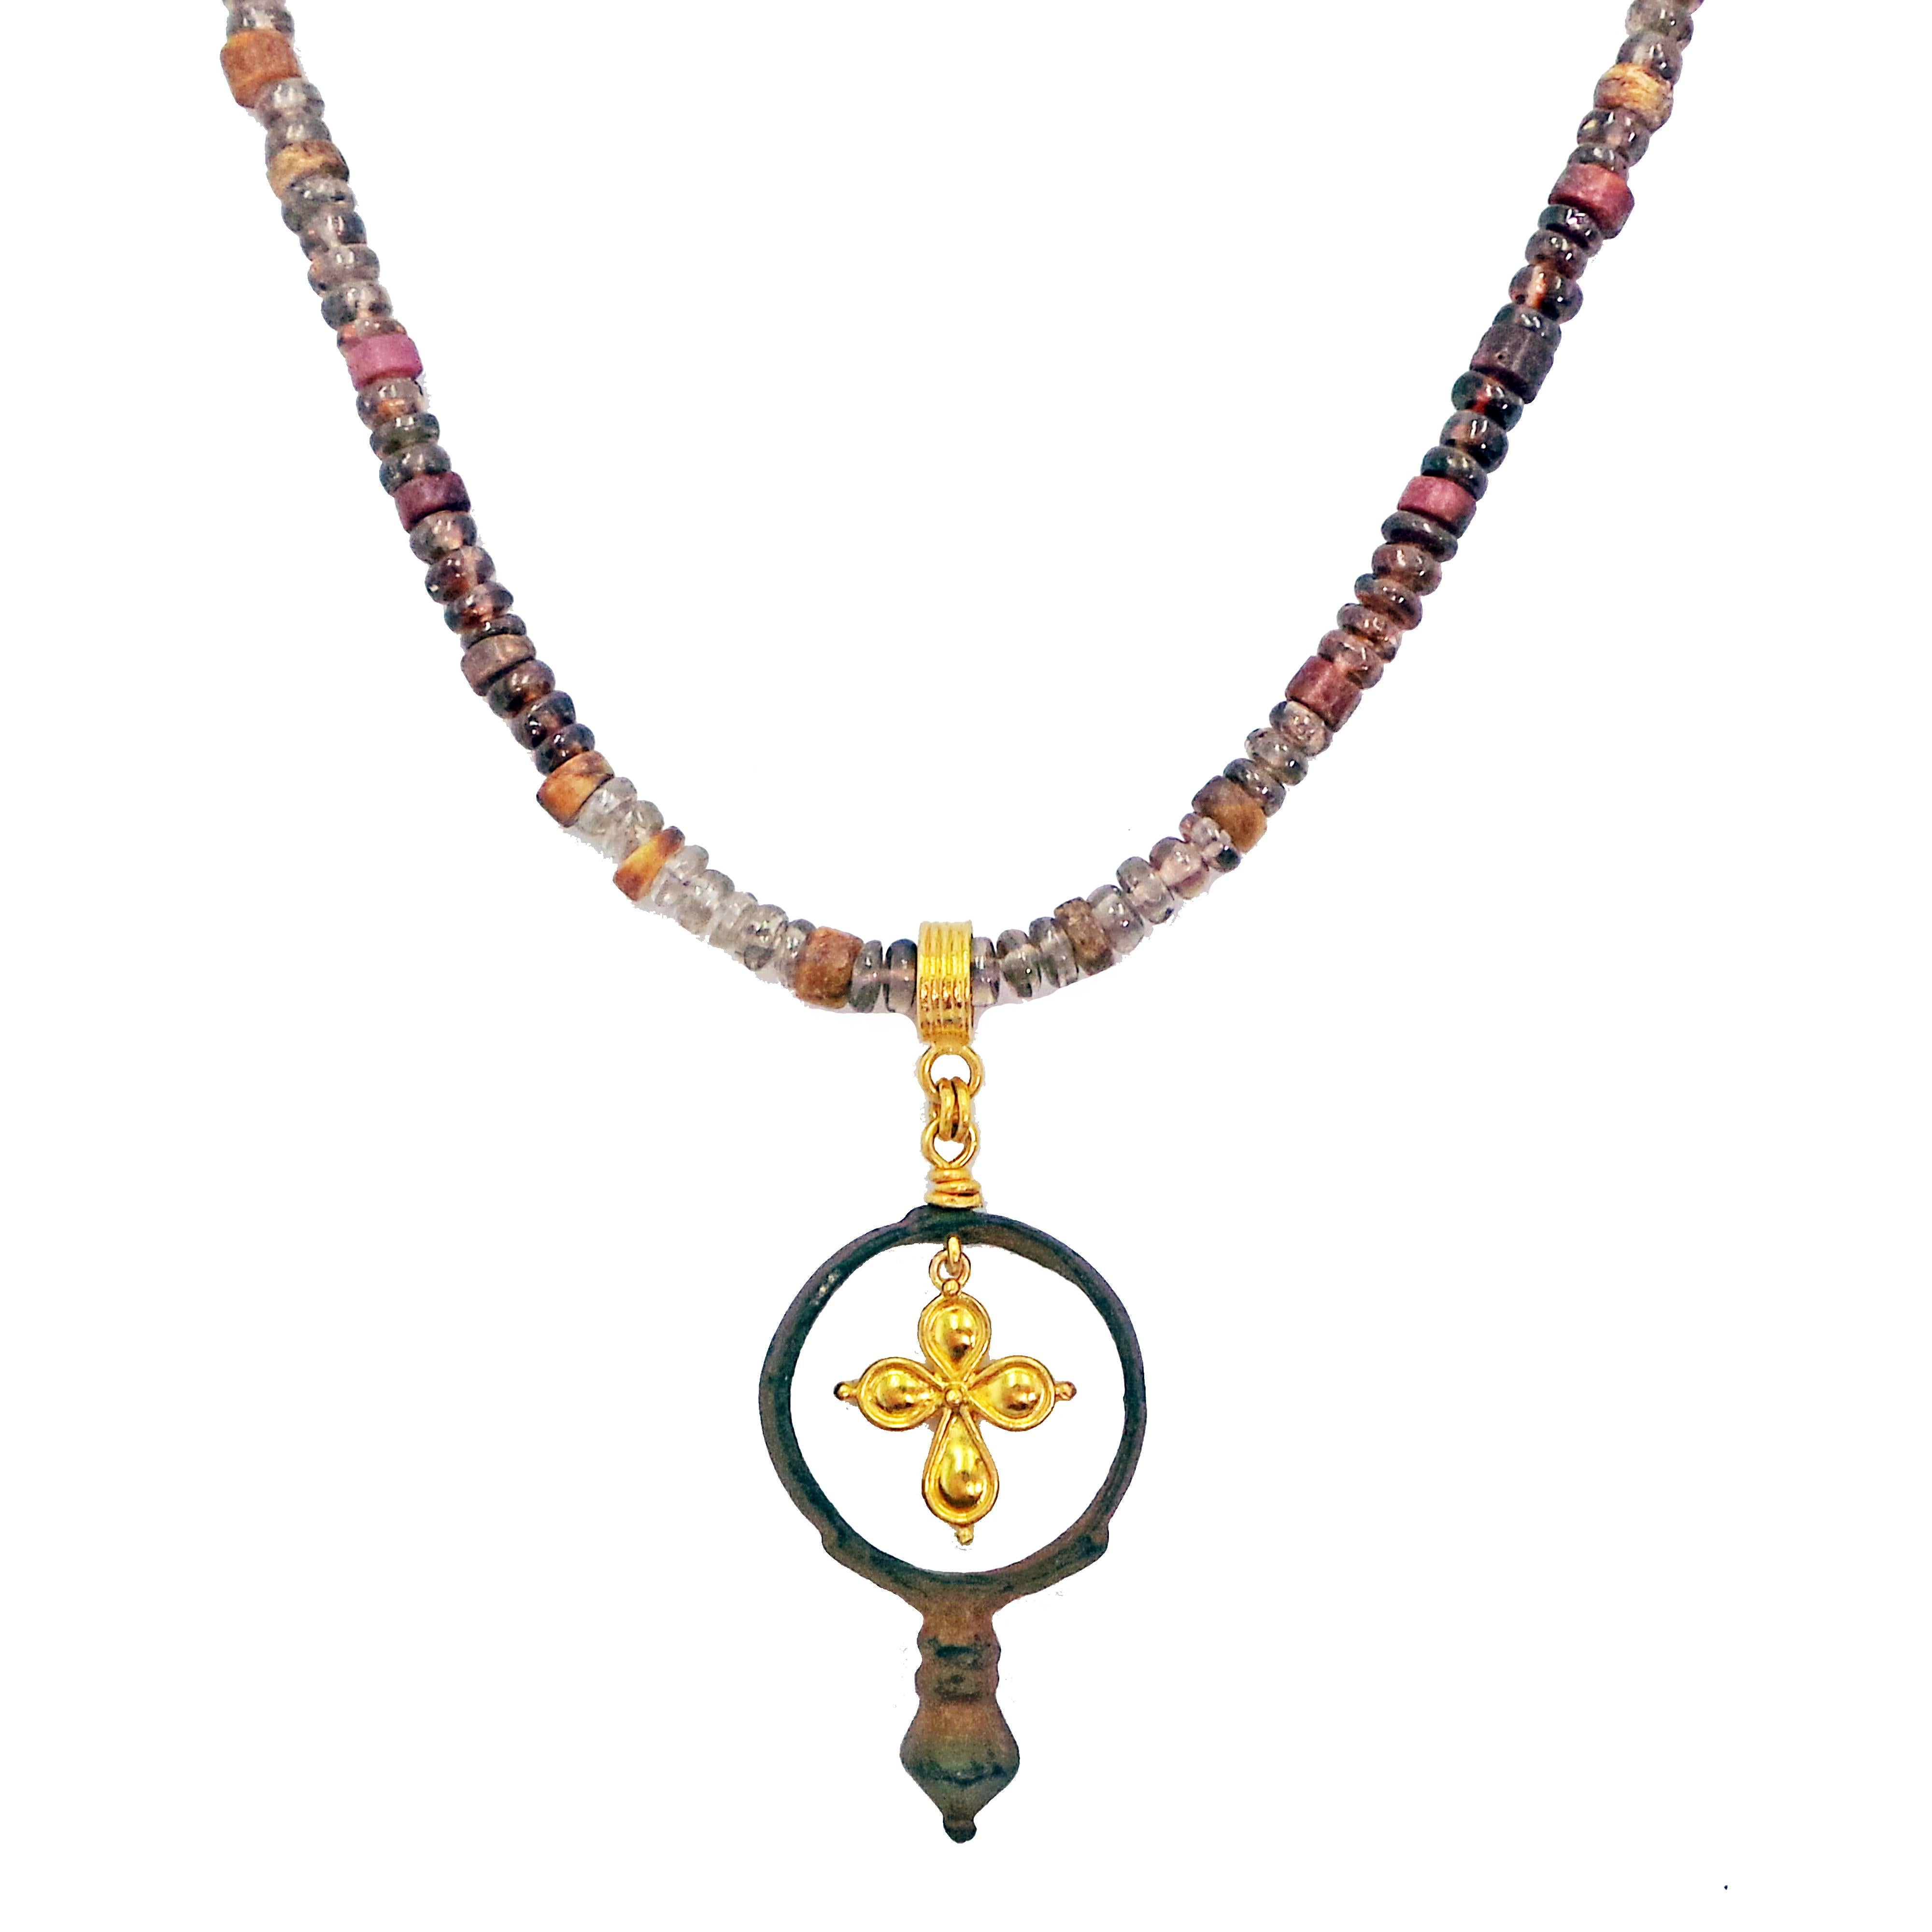 Authentic ancient Roman bronze ring artifact and 22k yellow gold cross charm pendant on an ombré red / purple / brown tone Spinel and antique Spiny Oyster Shell beaded necklace. Necklace is finished with a 22k gold toggle closure. Necklace is 19.5